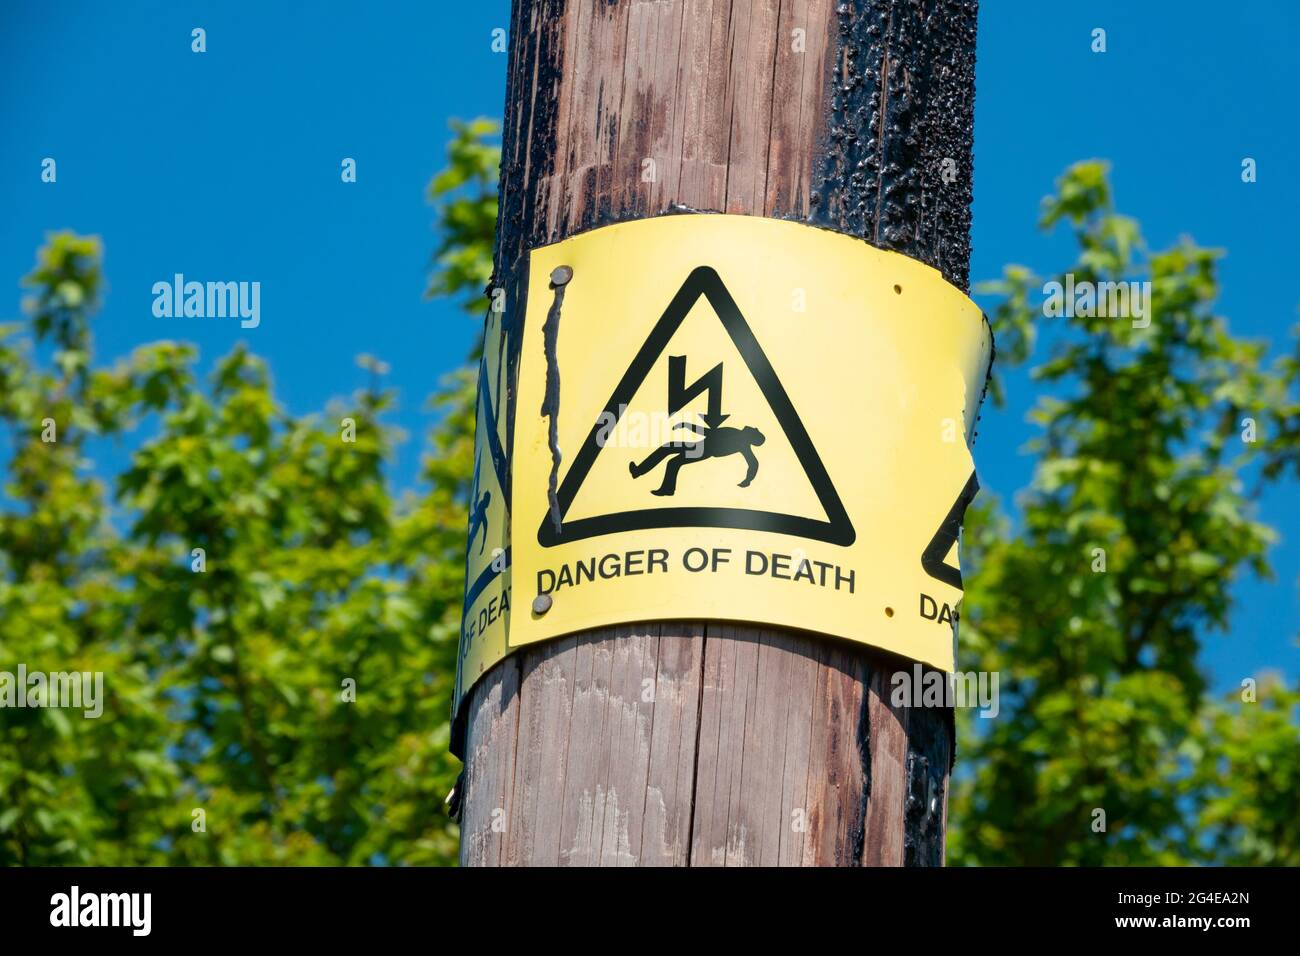 Danger of Death sign in yellow and black on a wooden telegraph pole with a vivd blue sky in the background and a green hedge in soft focus Stock Photo